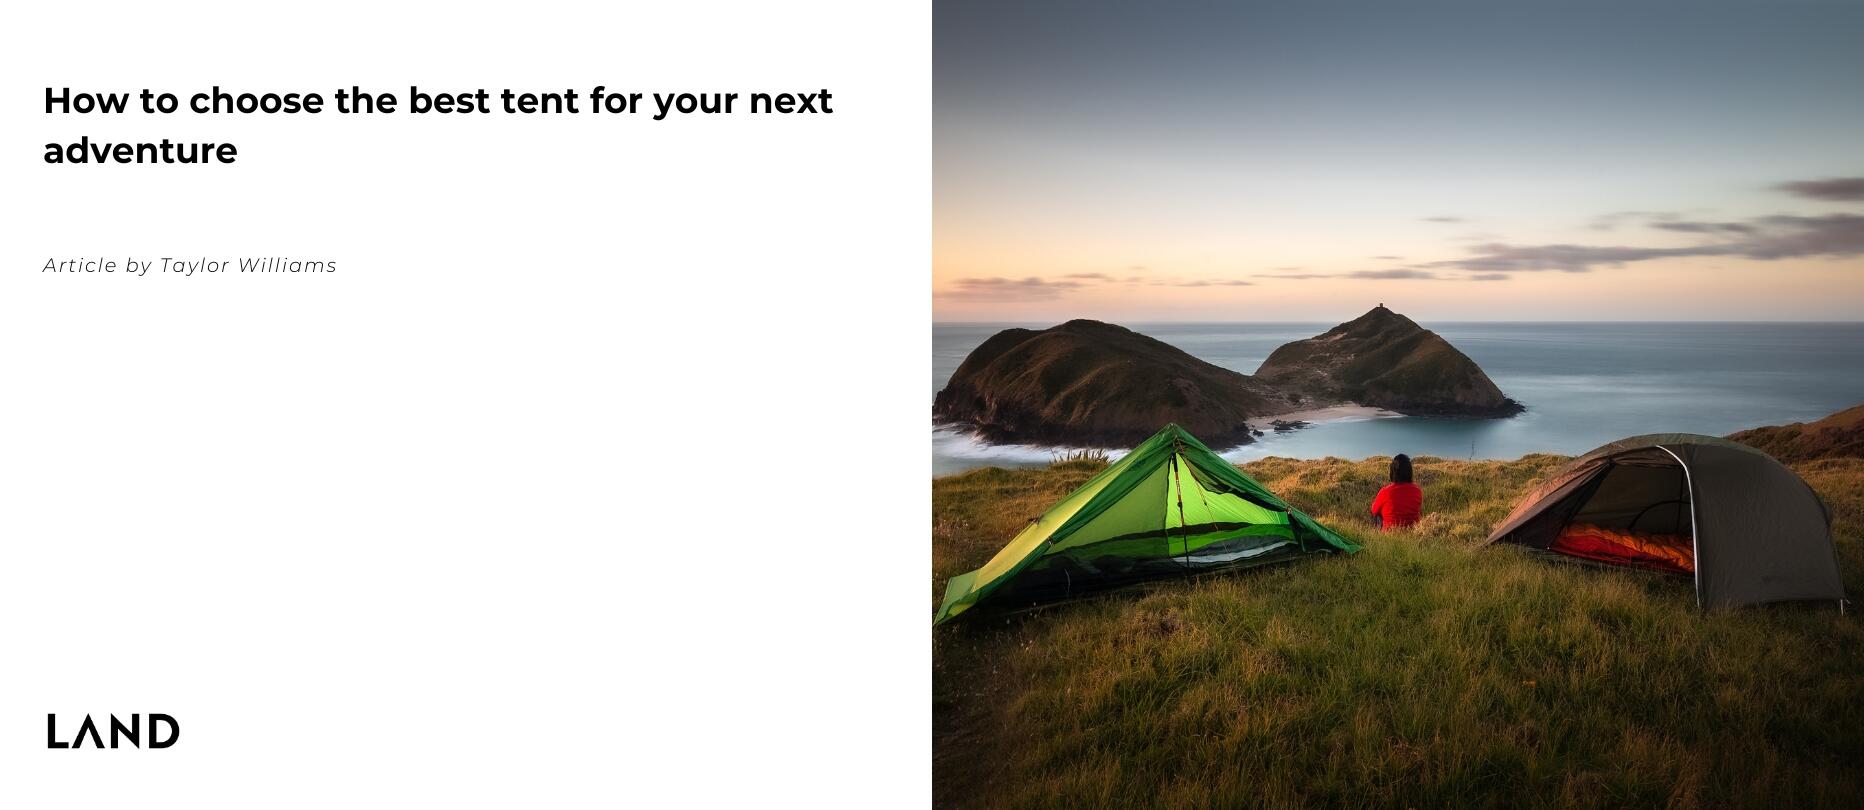 How to Choose the Best Tent for your Next Adventure